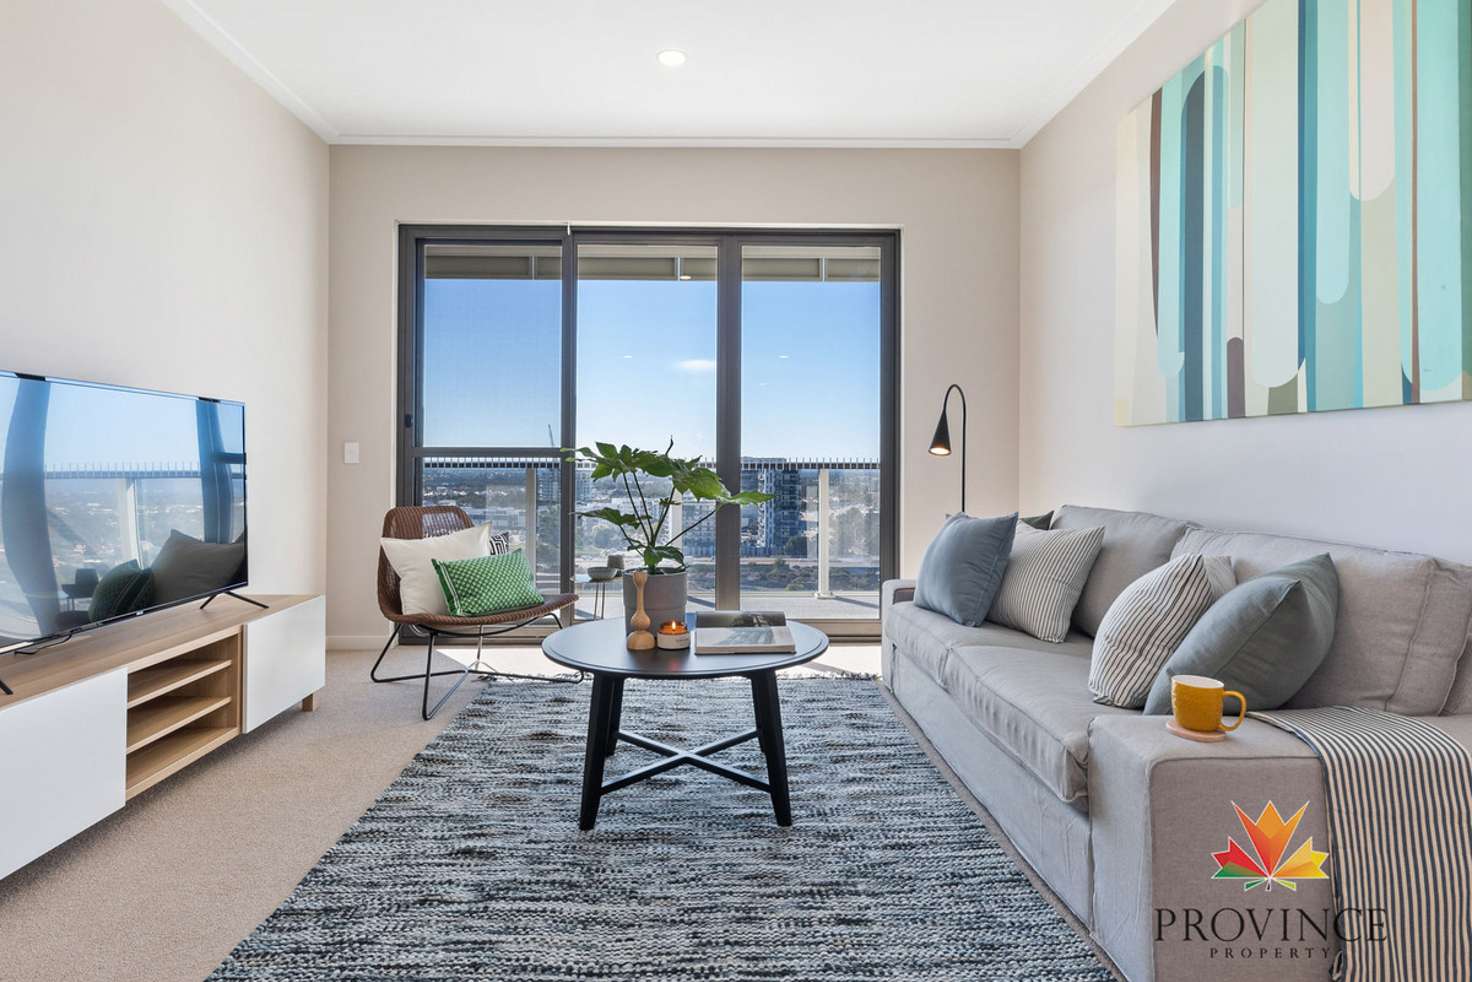 Main view of Homely apartment listing, 1403/118 Goodwood Parade, Burswood WA 6100